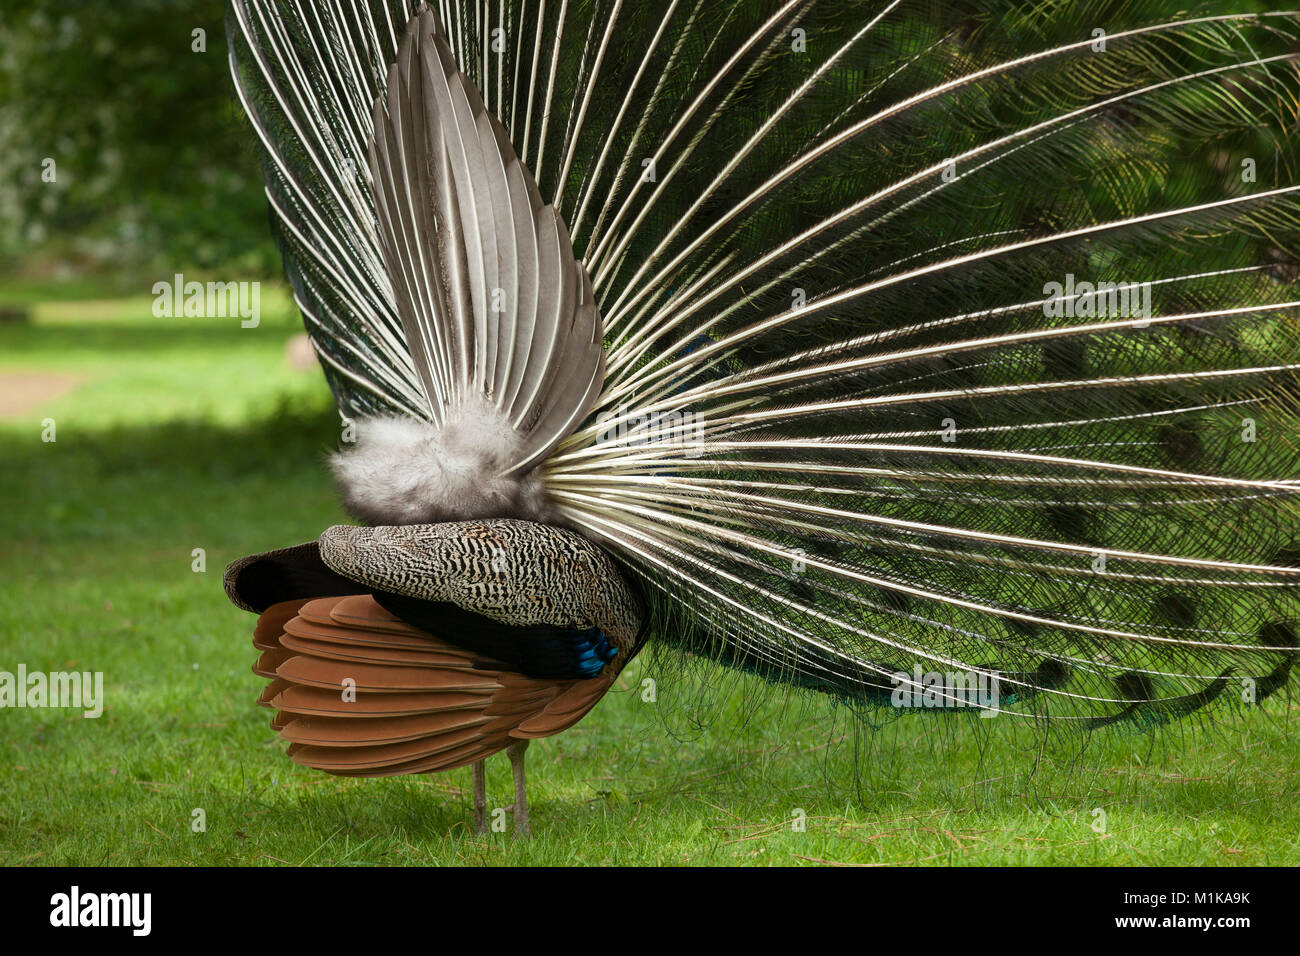 Germany, peacock, common peafowl (lat. Pavo cristatus), displaying tail, at the Forstbotanischer Garten, an arboretum and woodland botanical garden, b Stock Photo